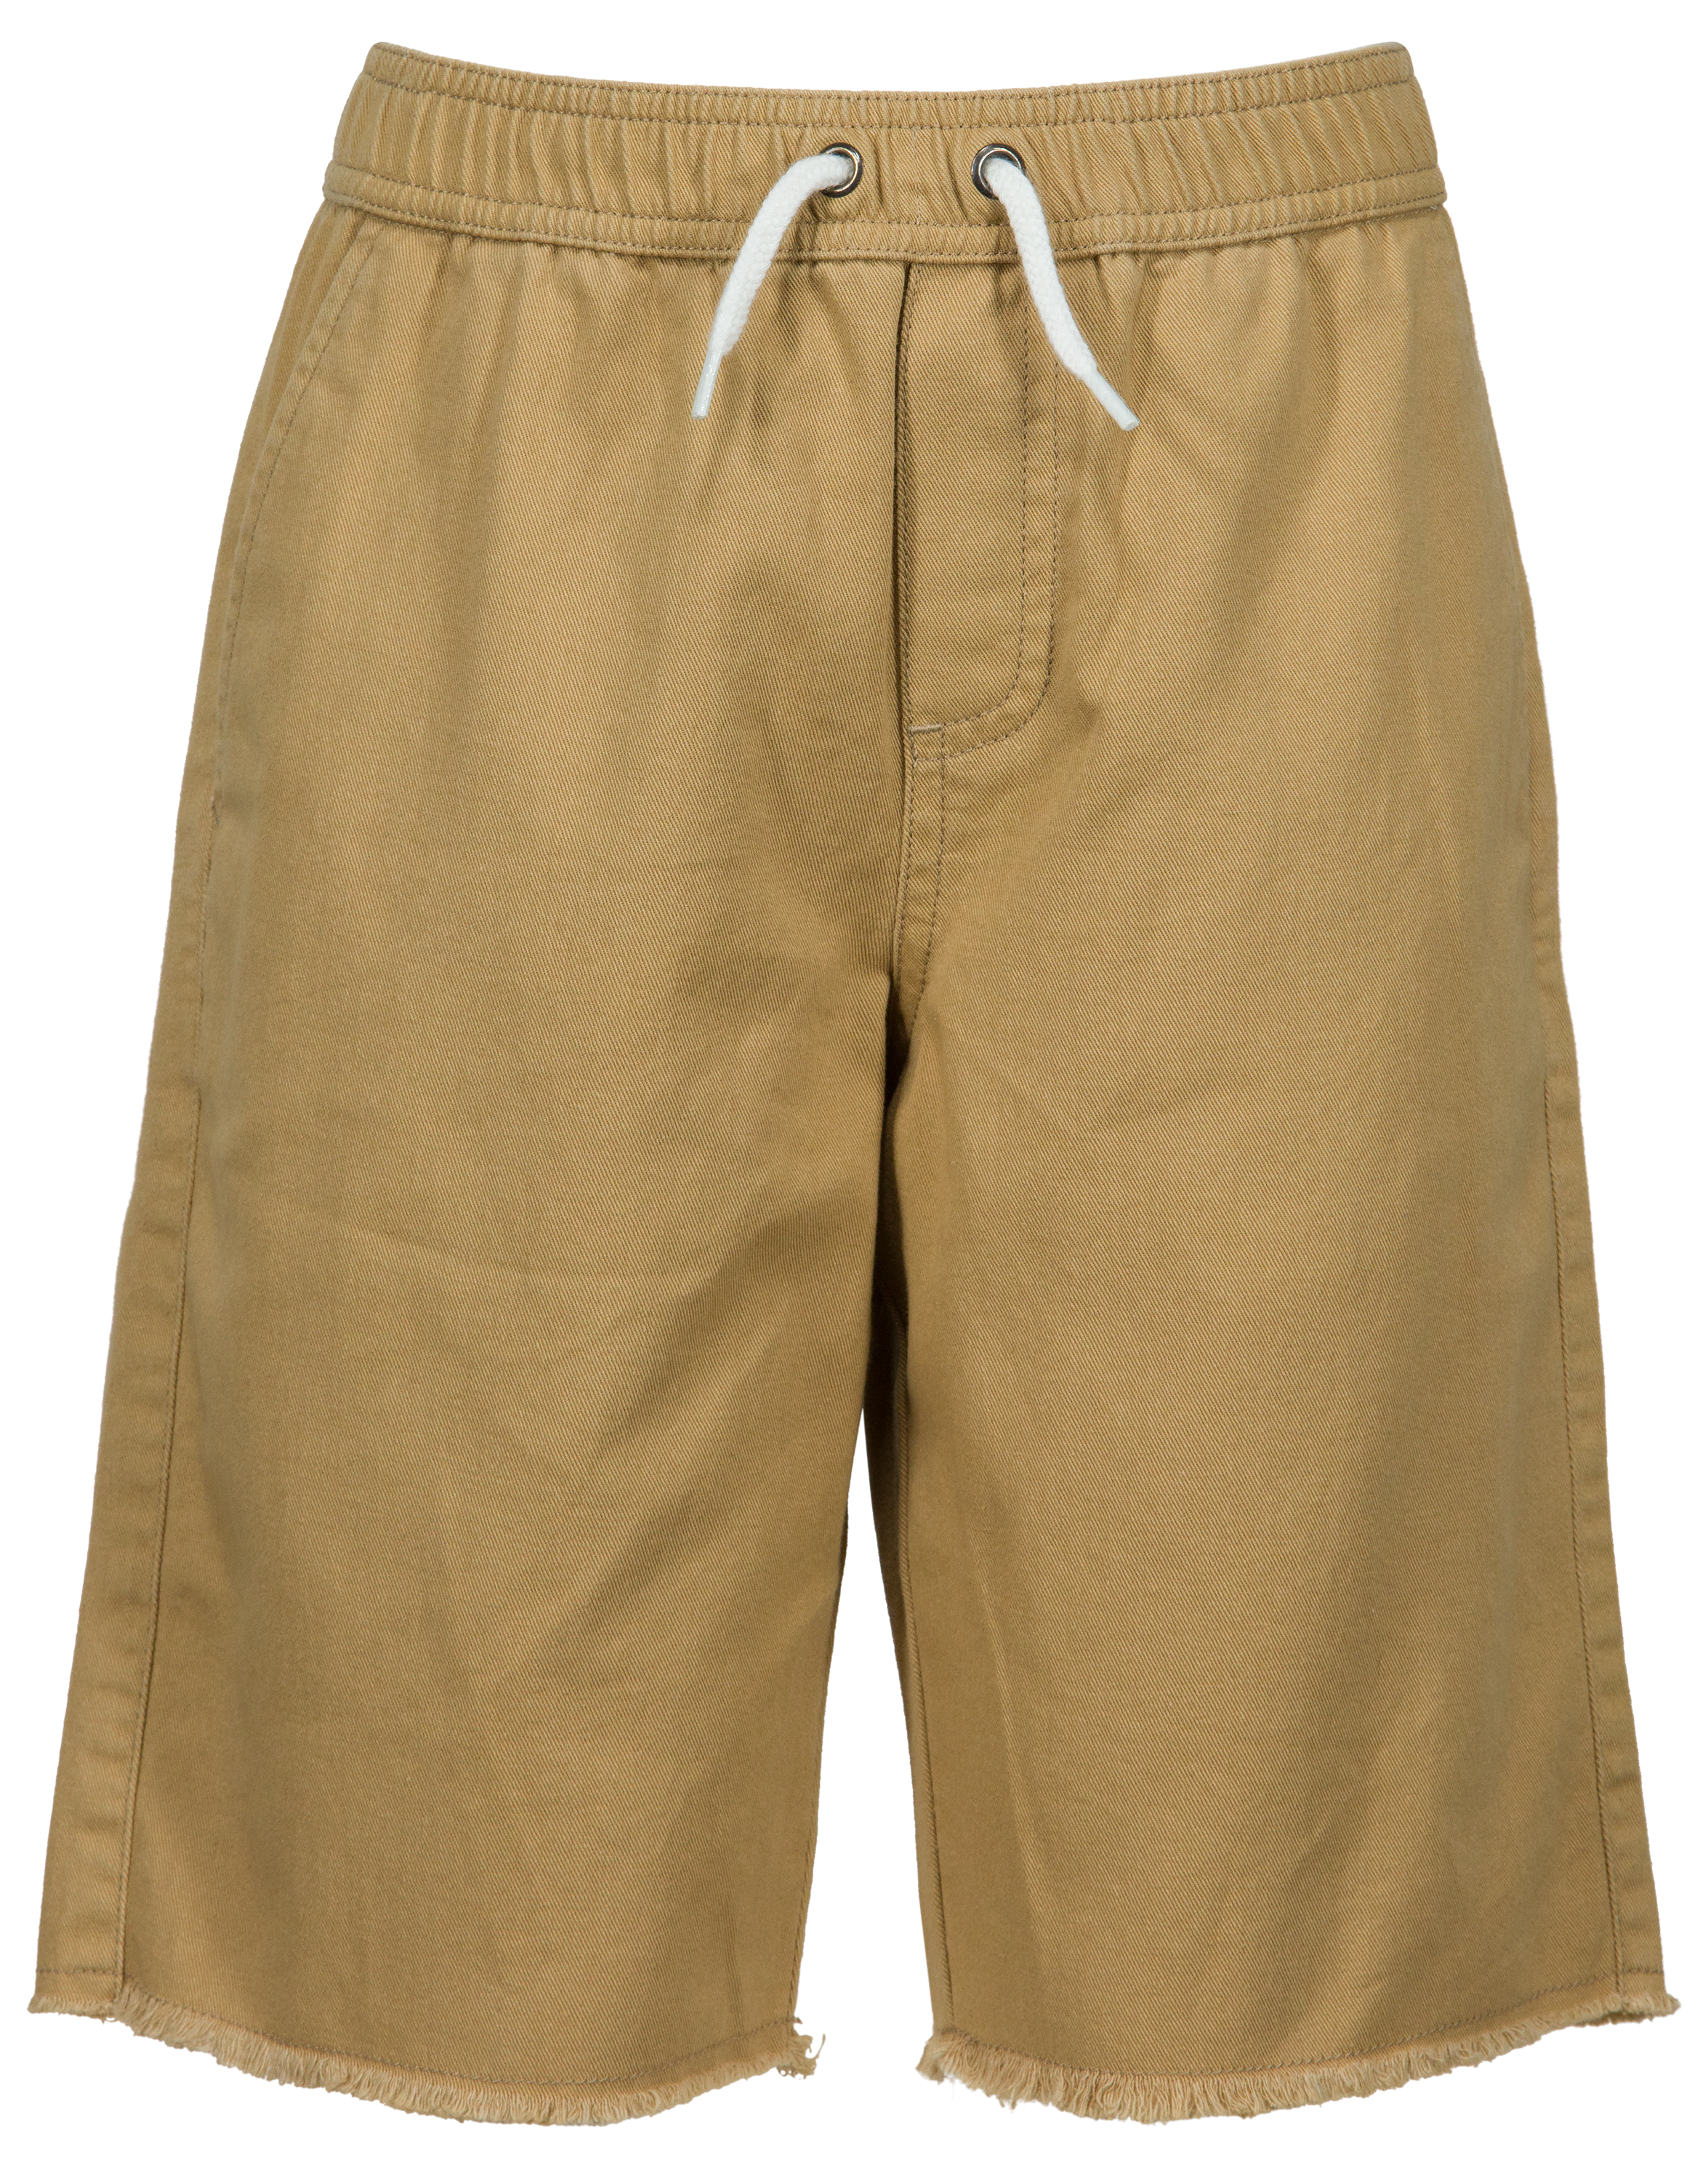 Bass Pro Shops Drawstring Shorts for Toddlers or Boys | Bass Pro Shops